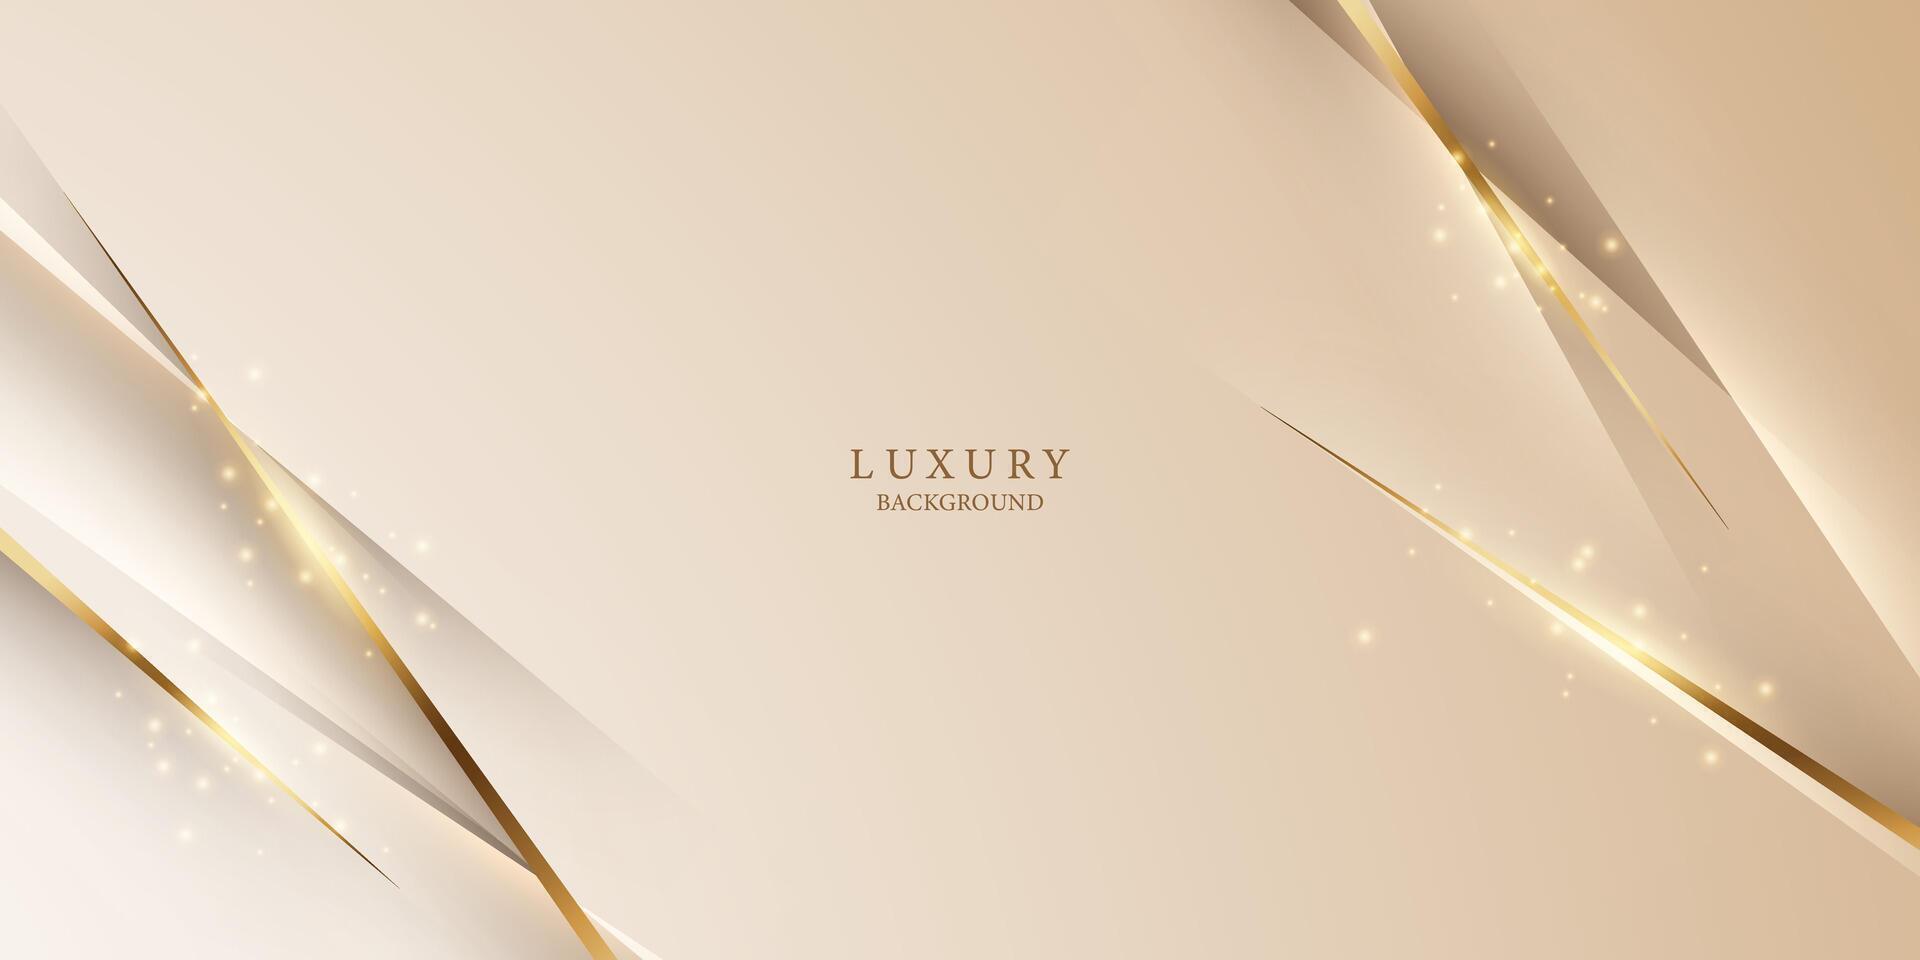 golden abstract background with luxury golden lines vector illustration